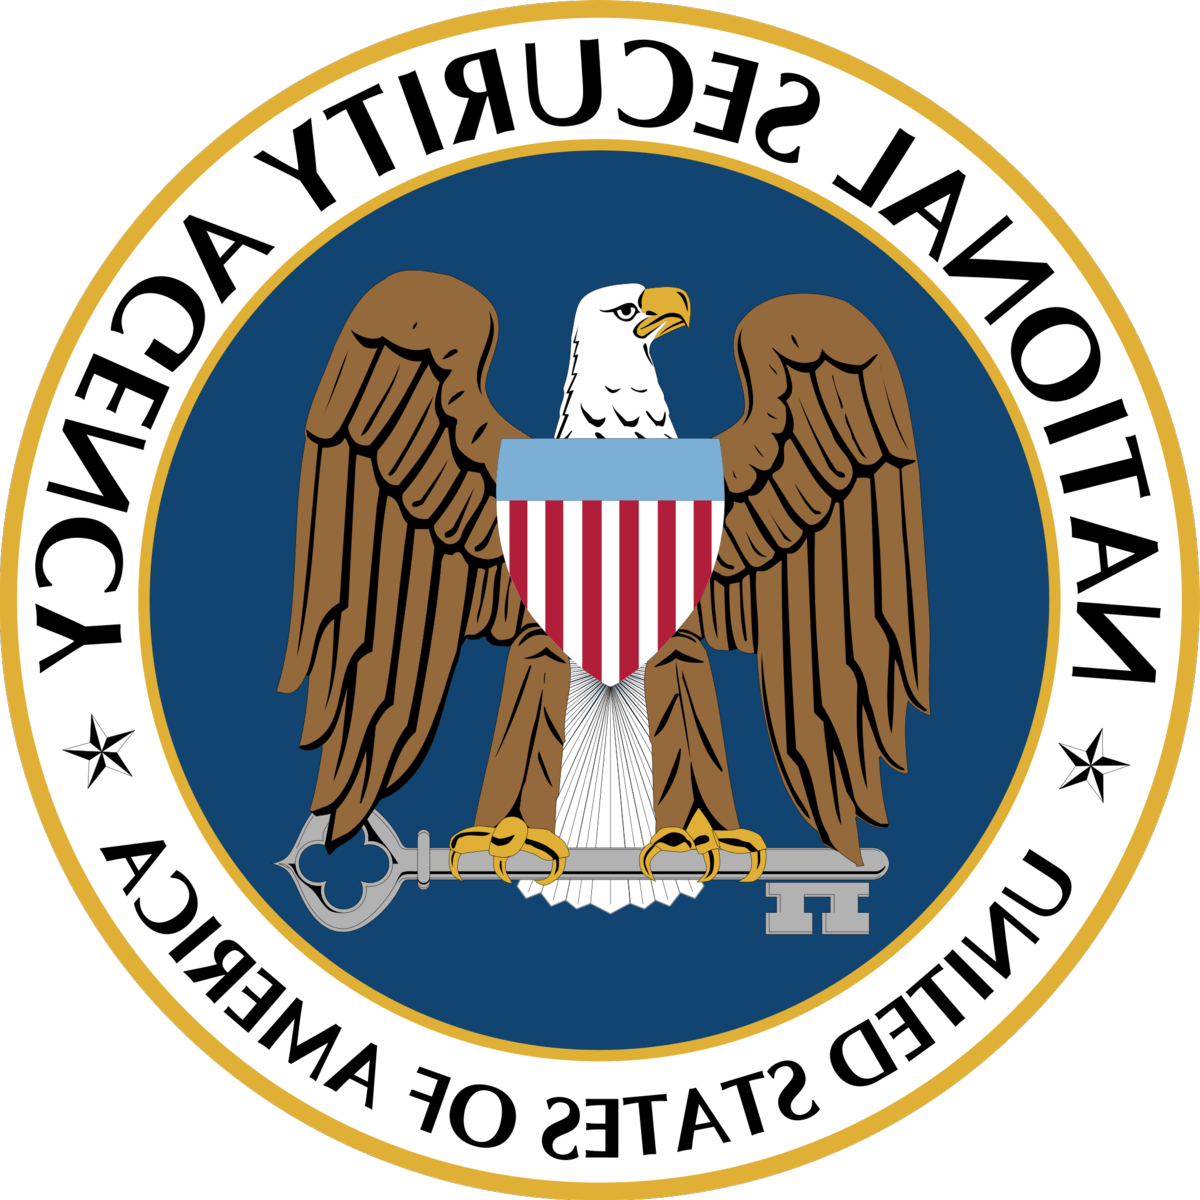 National Security Agency (NSA) Seal